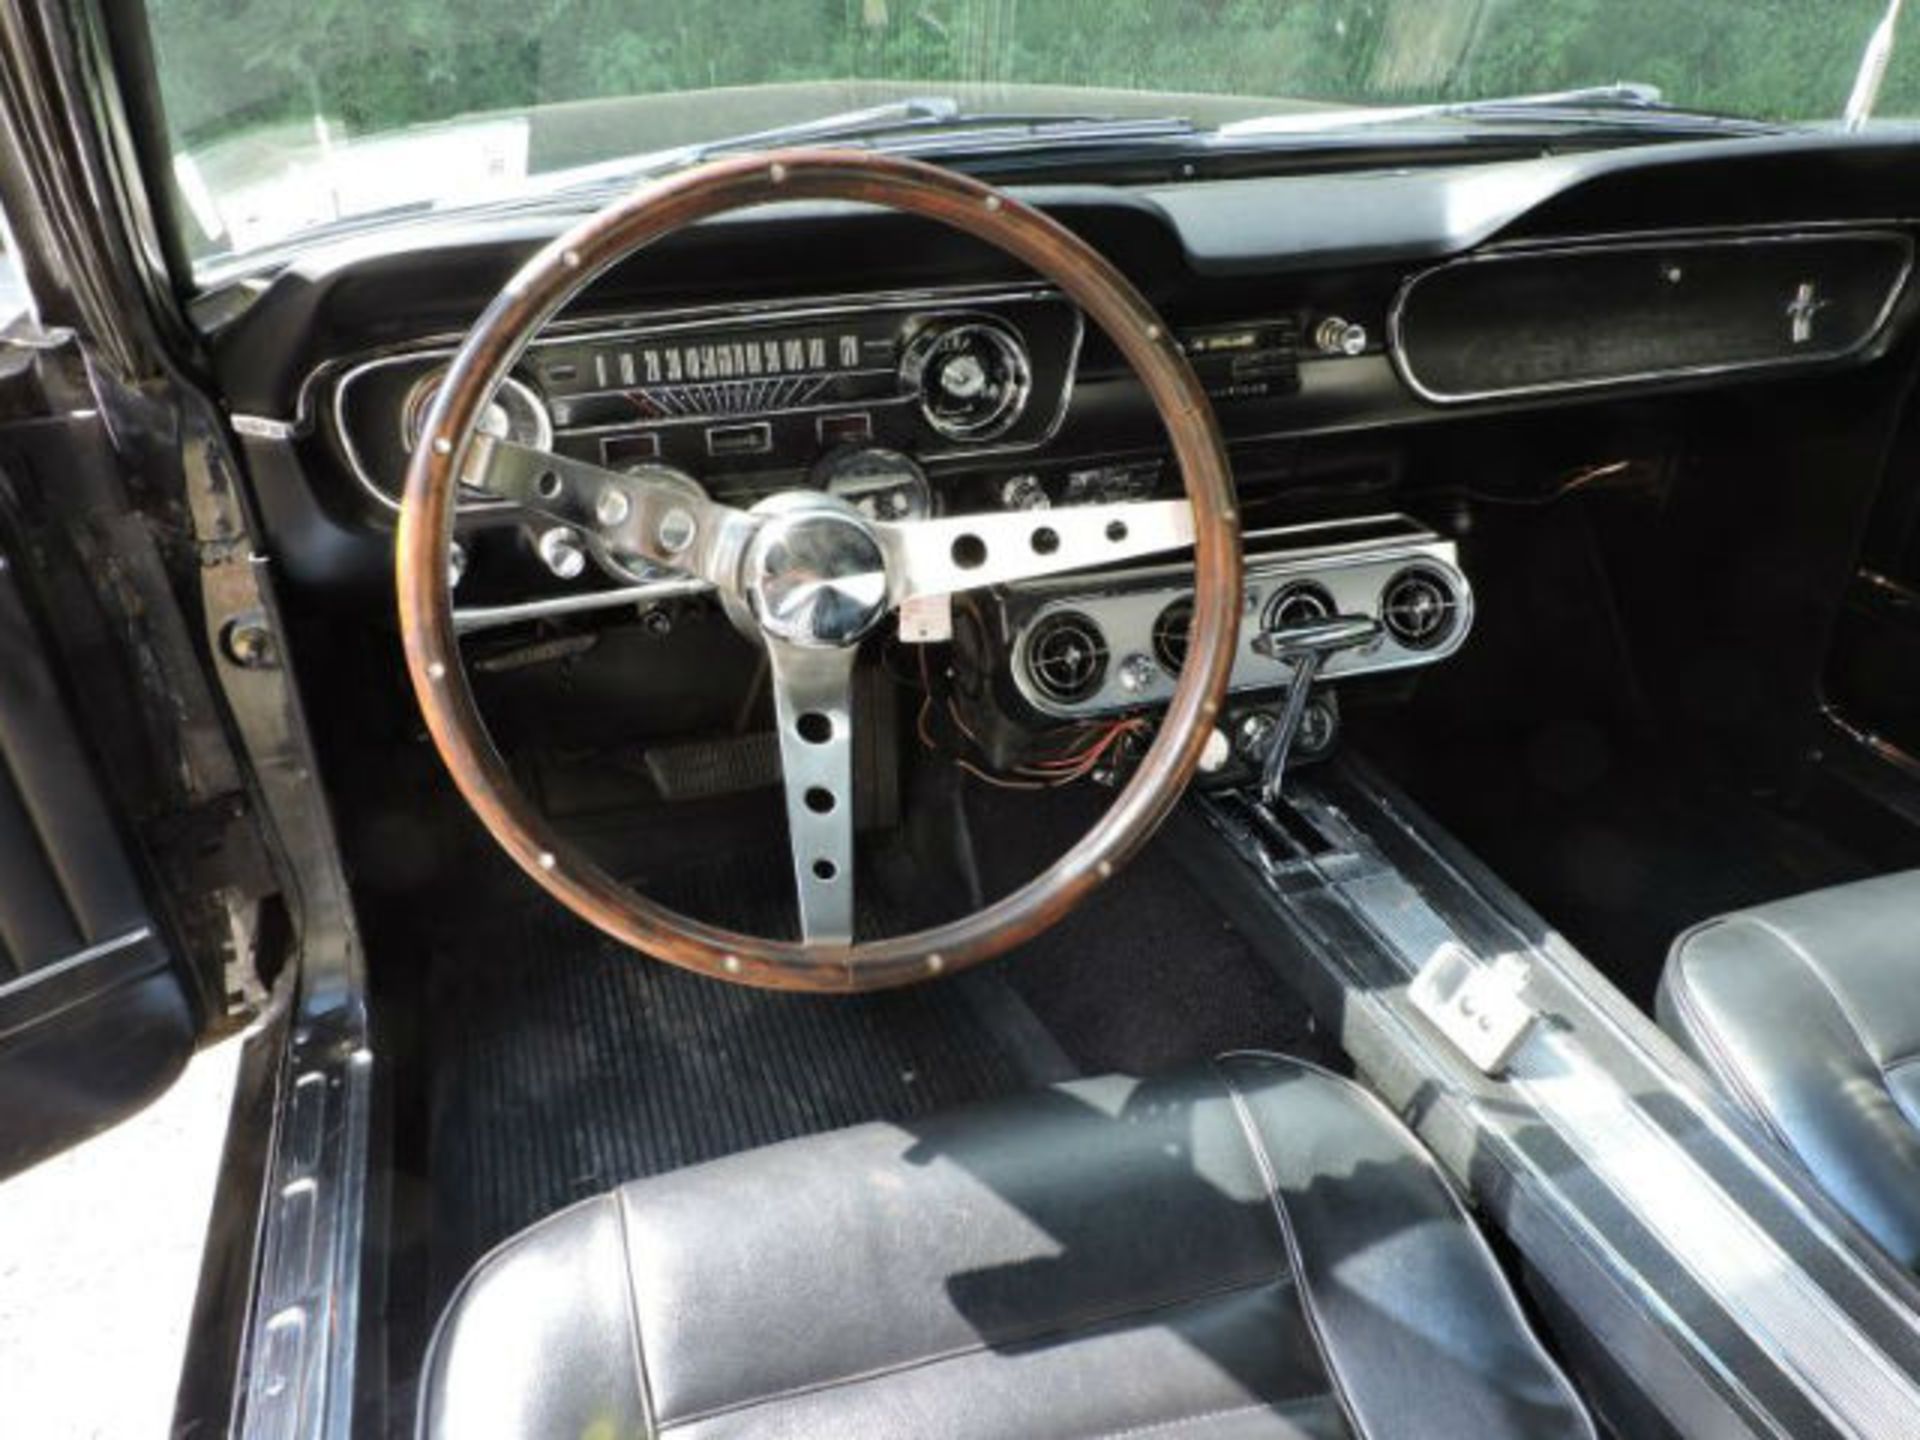 65' Ford Mustang - Year 1965, Automatic Transmission, Original Factory A/C, 6 Cylinders, Approx 72, - Image 5 of 8